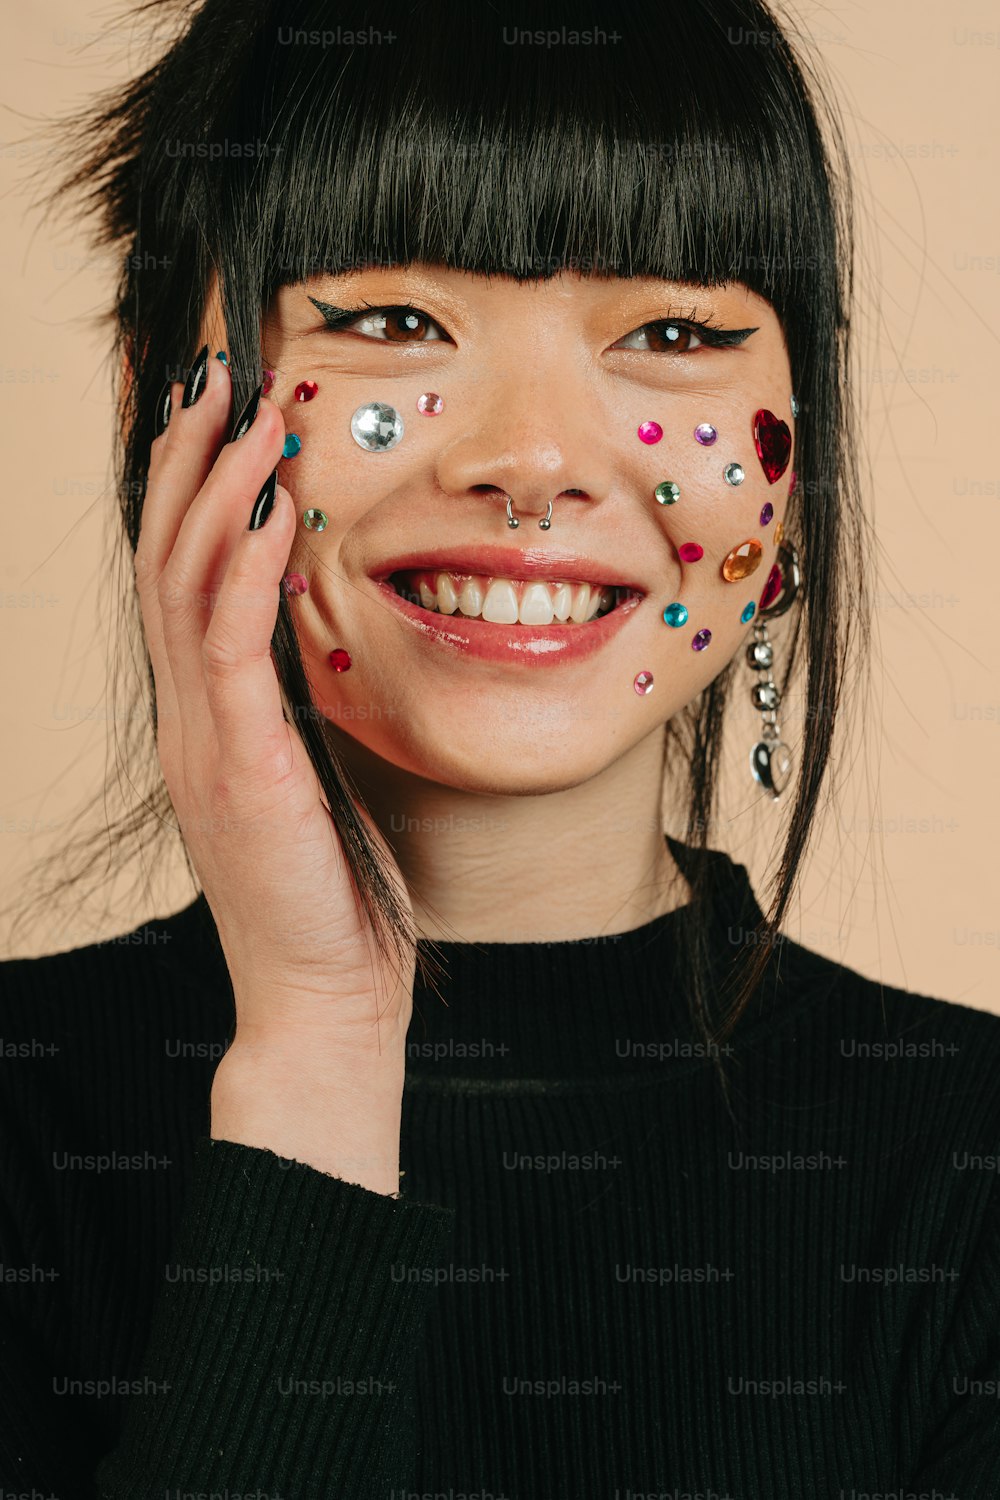 a woman with black hair and a black sweater has colorful nail art on her face